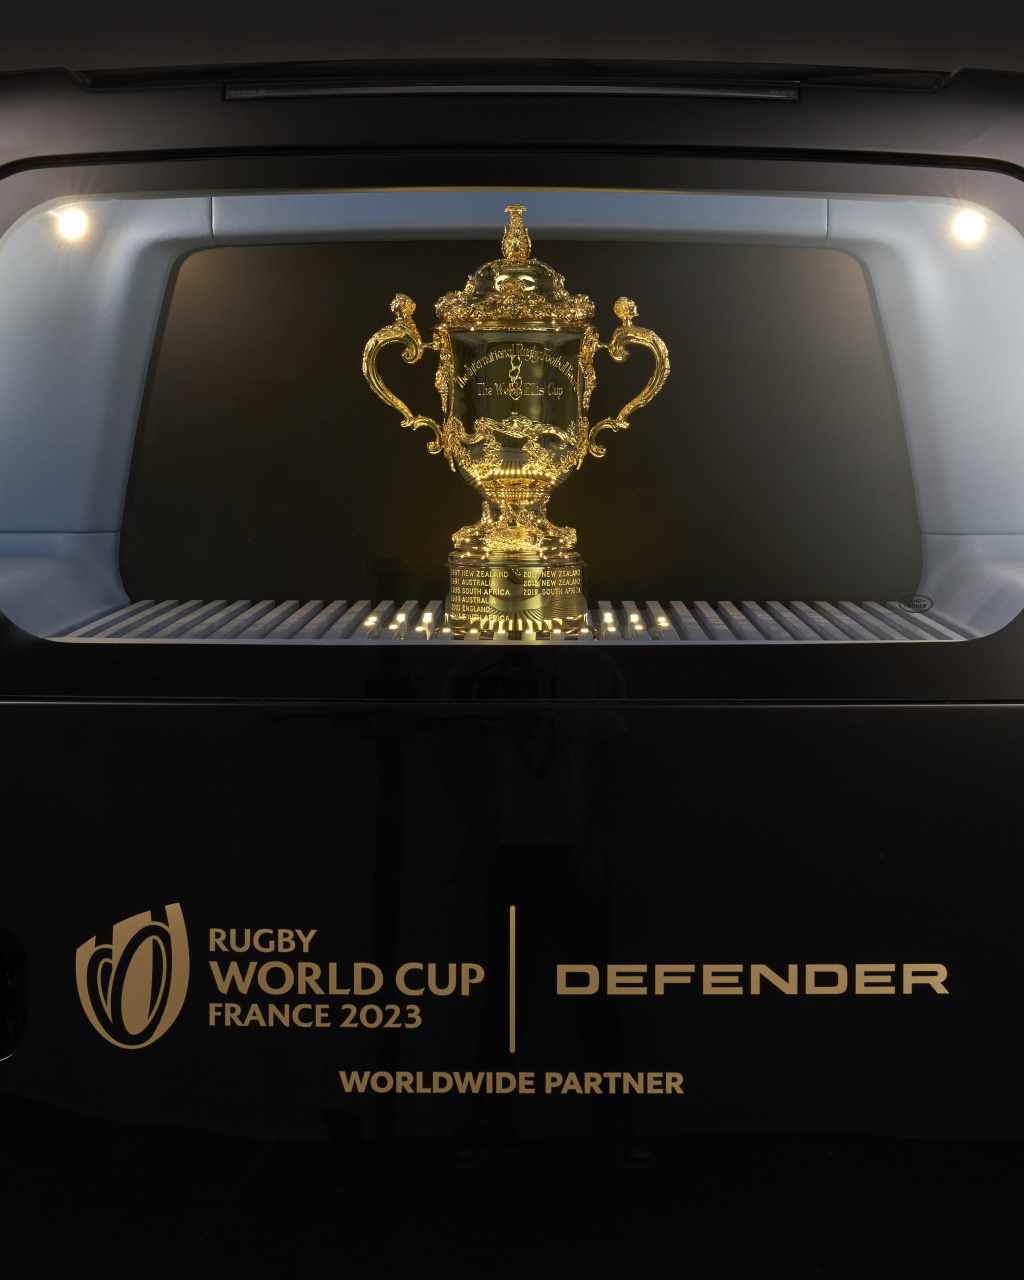 A view of the rear of the Defender 110's trophy cabinet with the Webb Ellis Cup on display